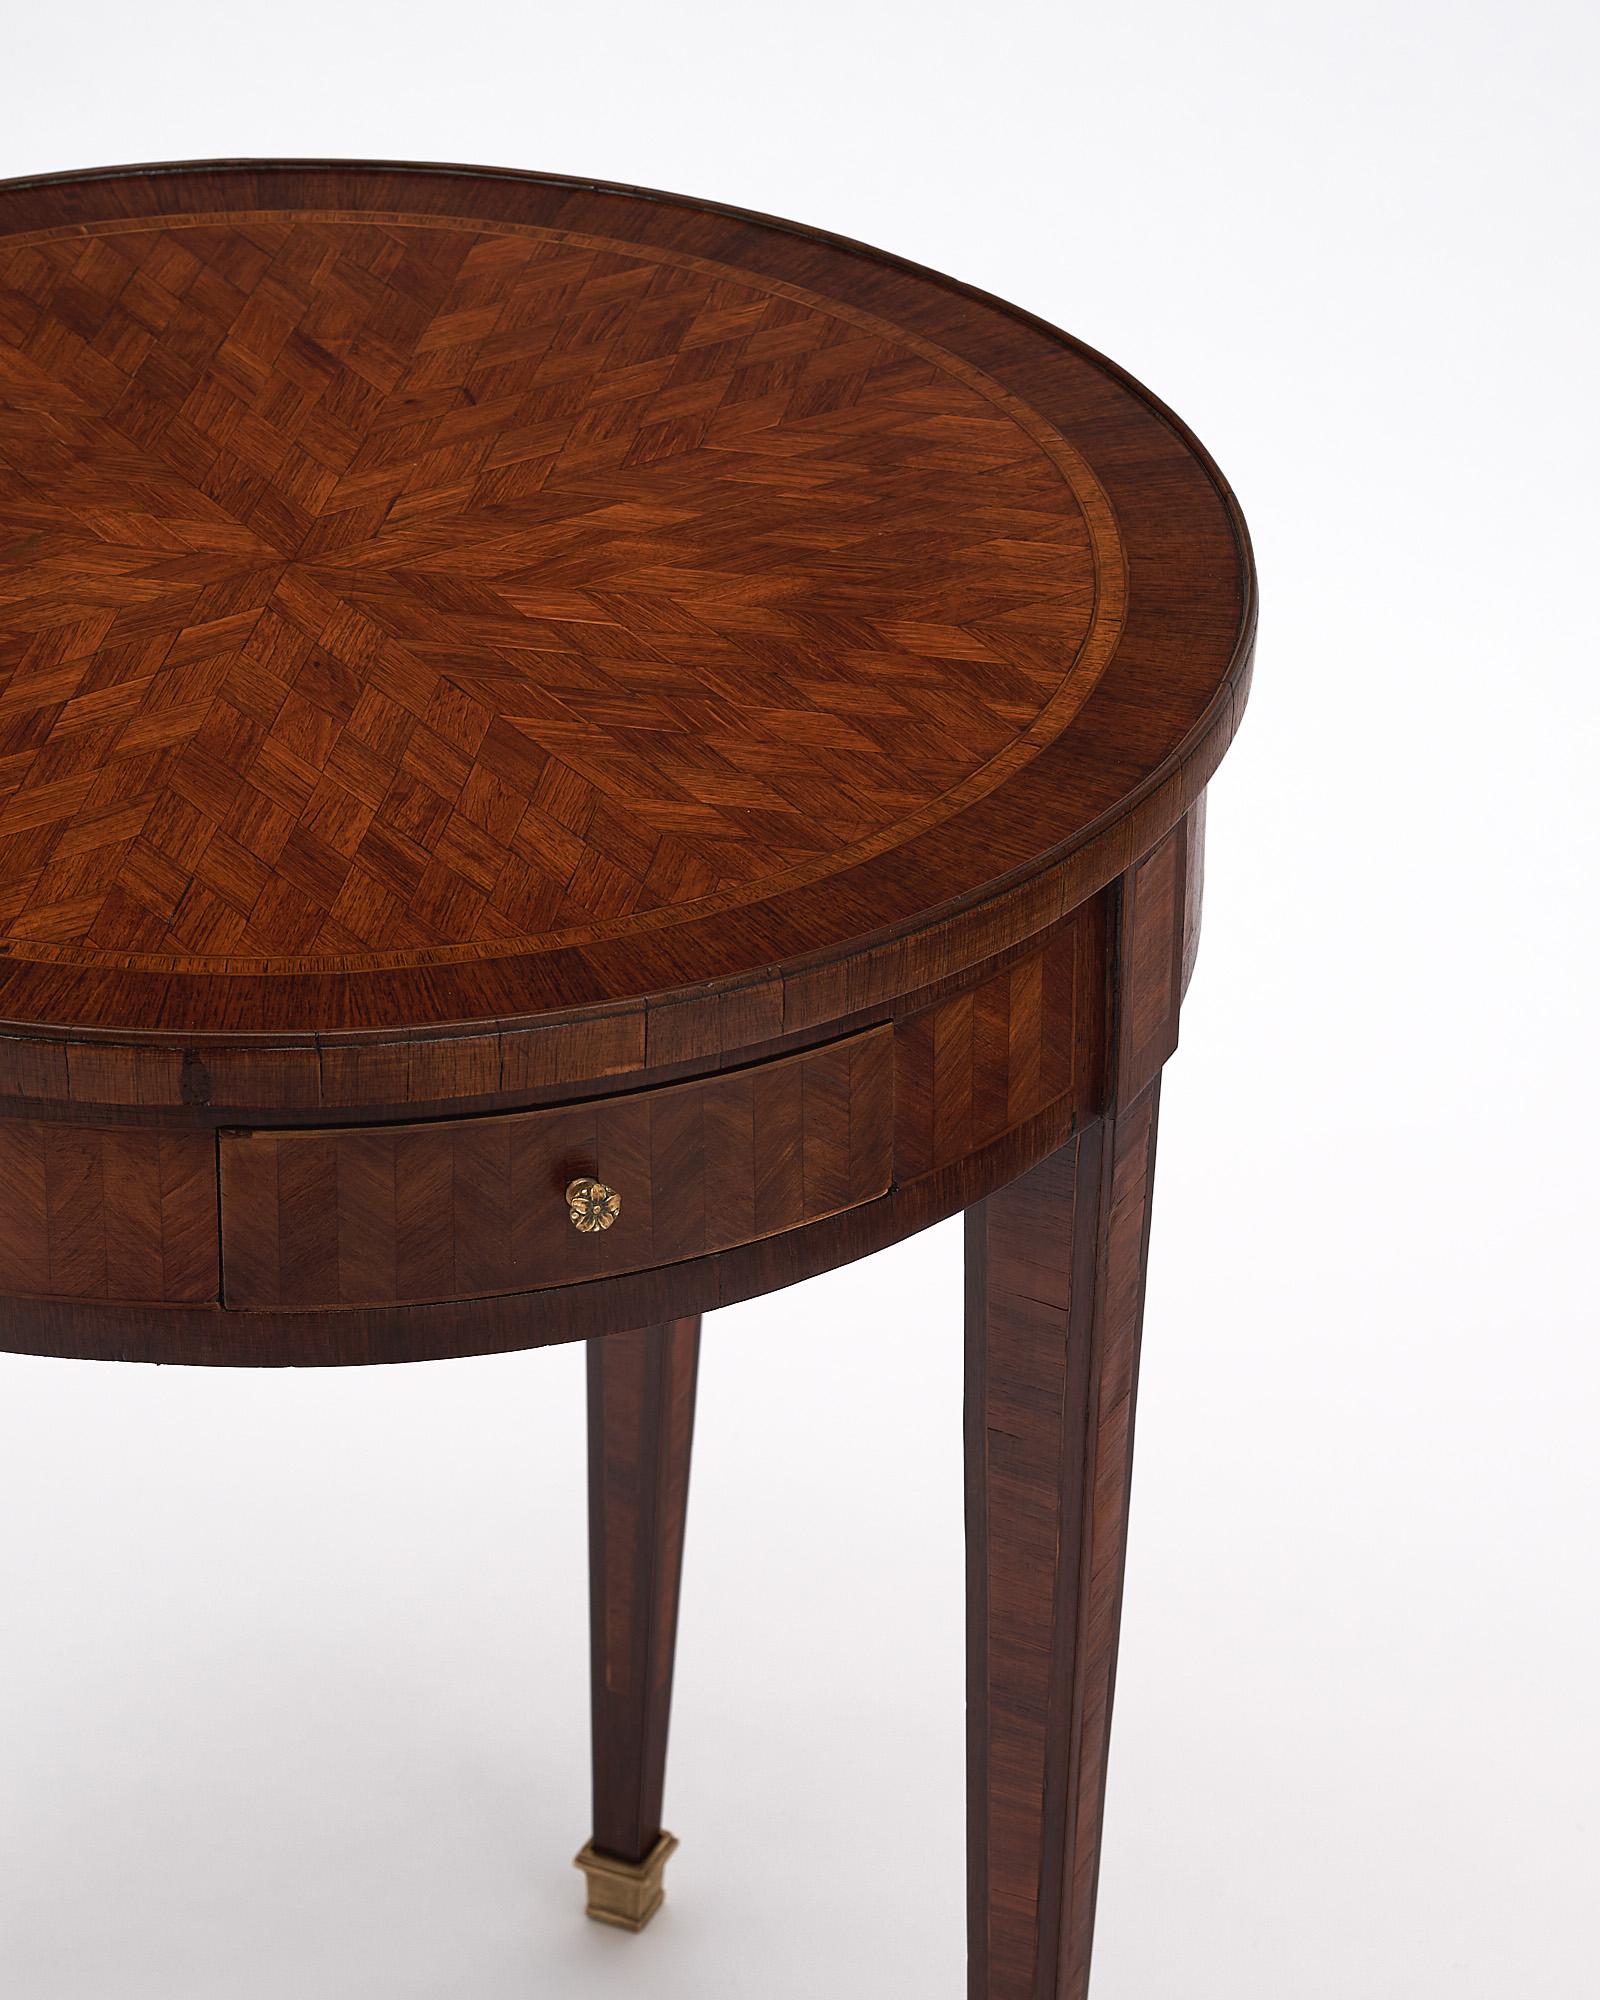 Early 19th Century Louis XVI Period Parquetry Bouillotte Table